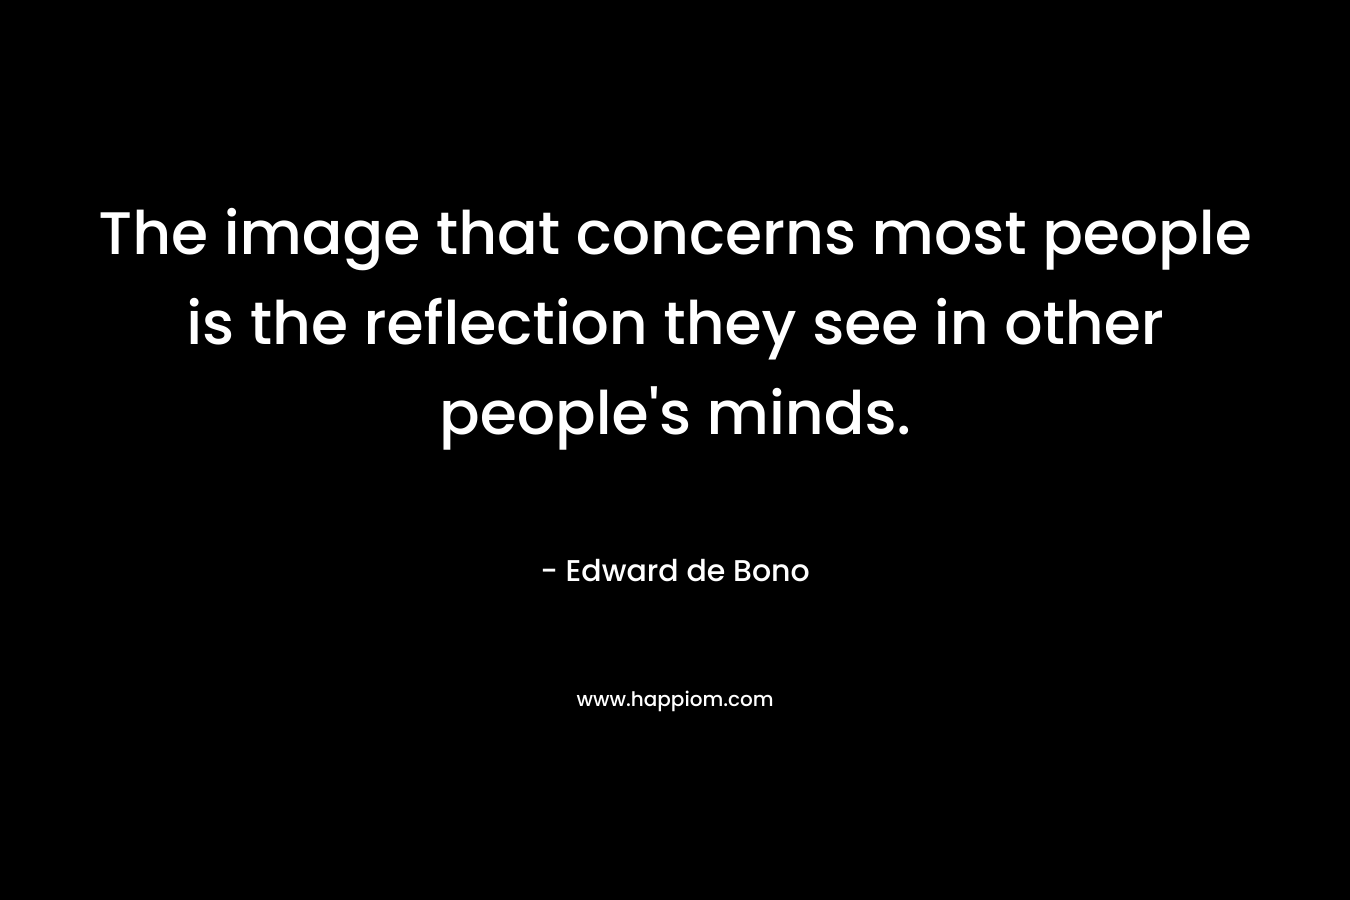 The image that concerns most people is the reflection they see in other people’s minds. – Edward de Bono